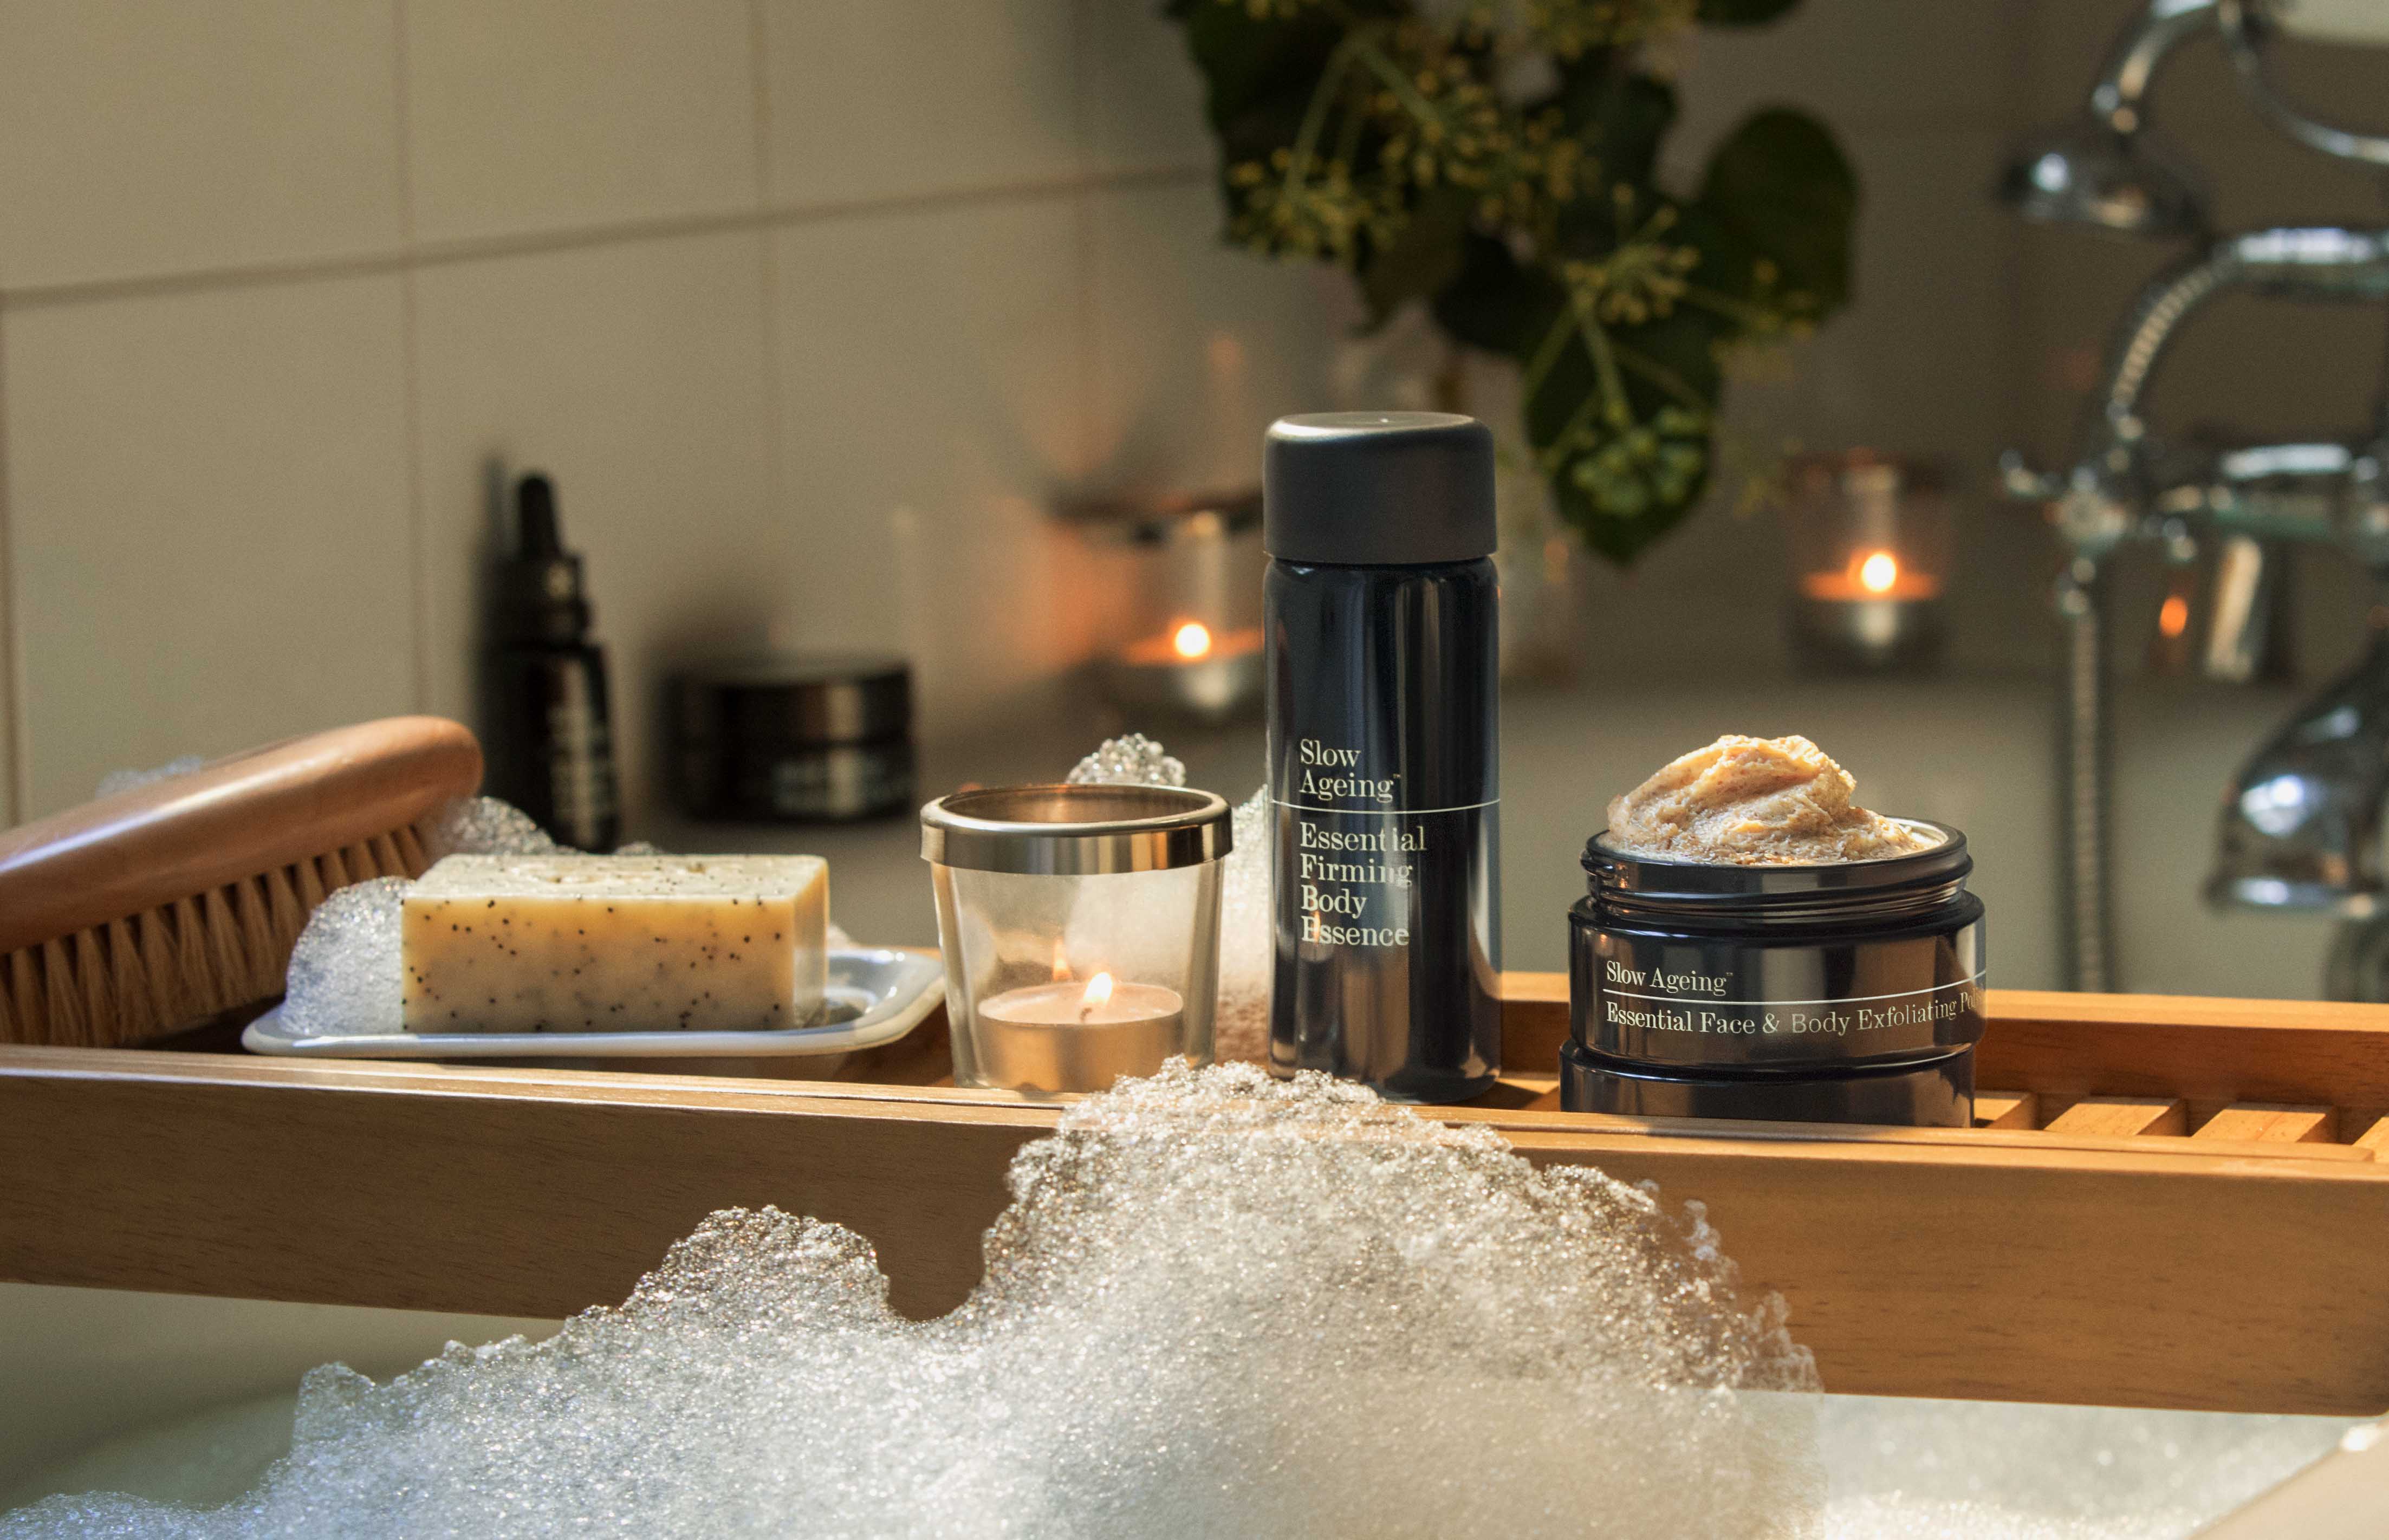 Showered With Love - Slow Ageing Essentials  